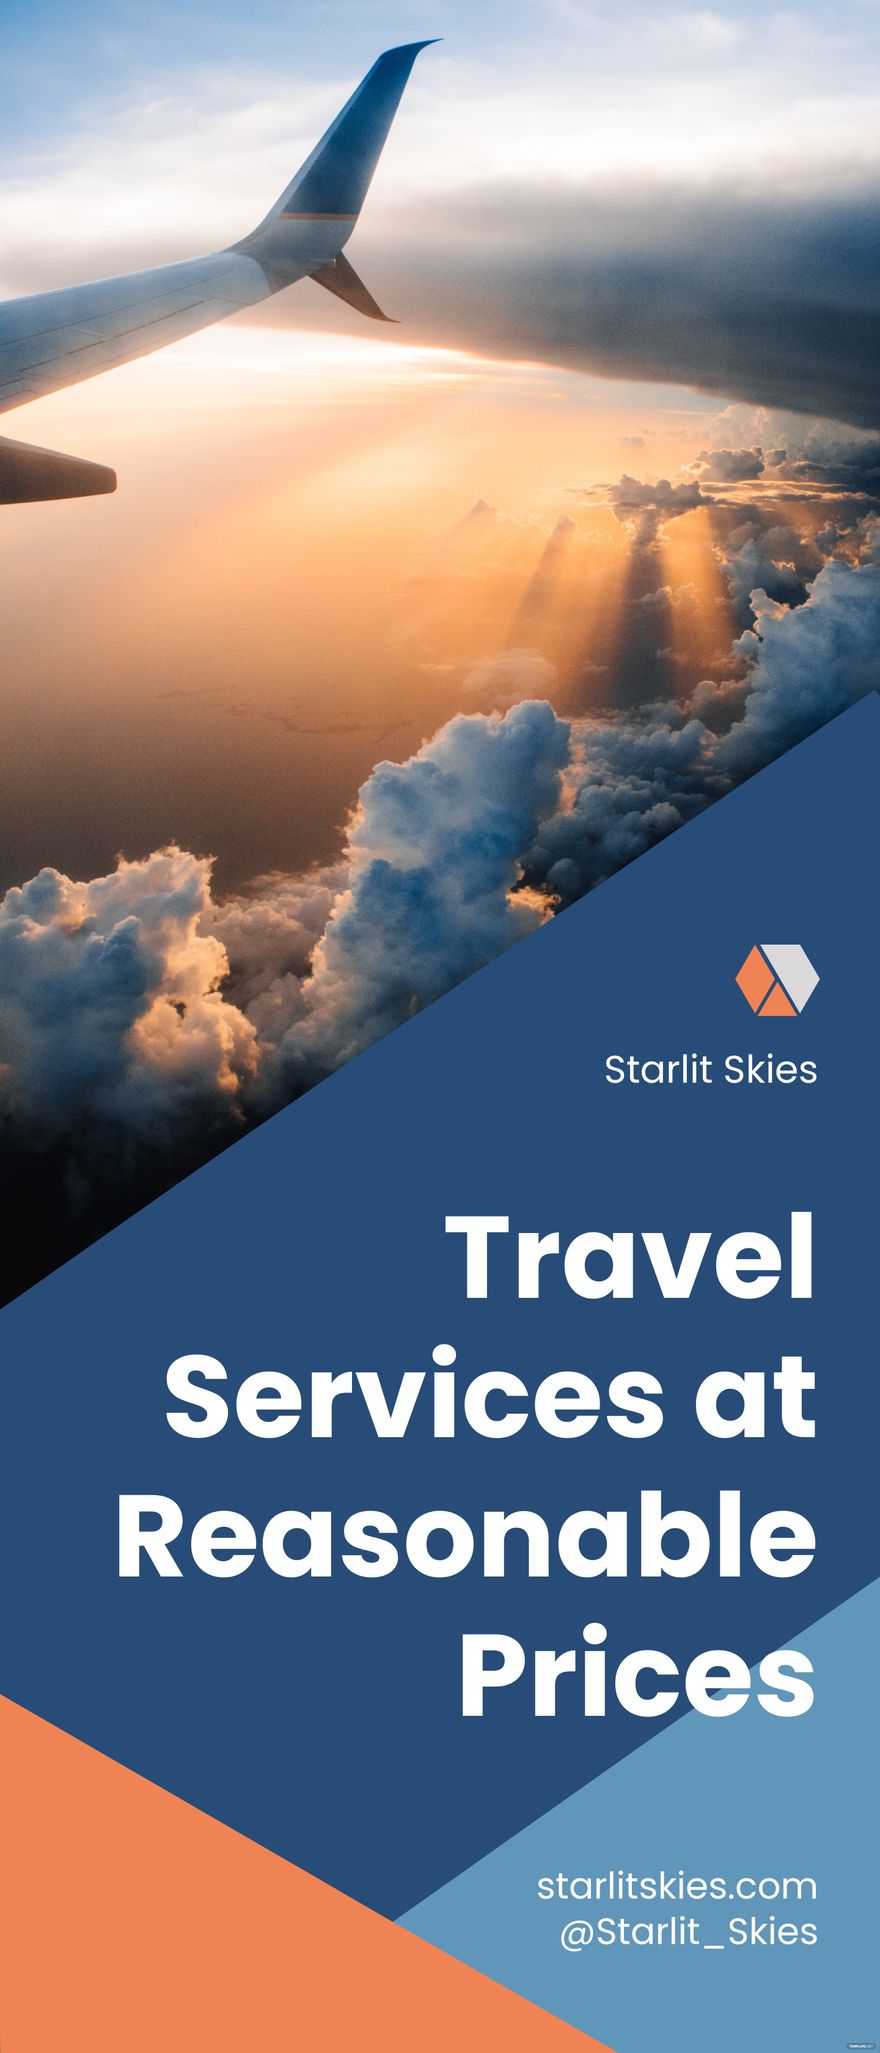 Travel Services Roll Up Banner Template in Word, Google Docs, Publisher